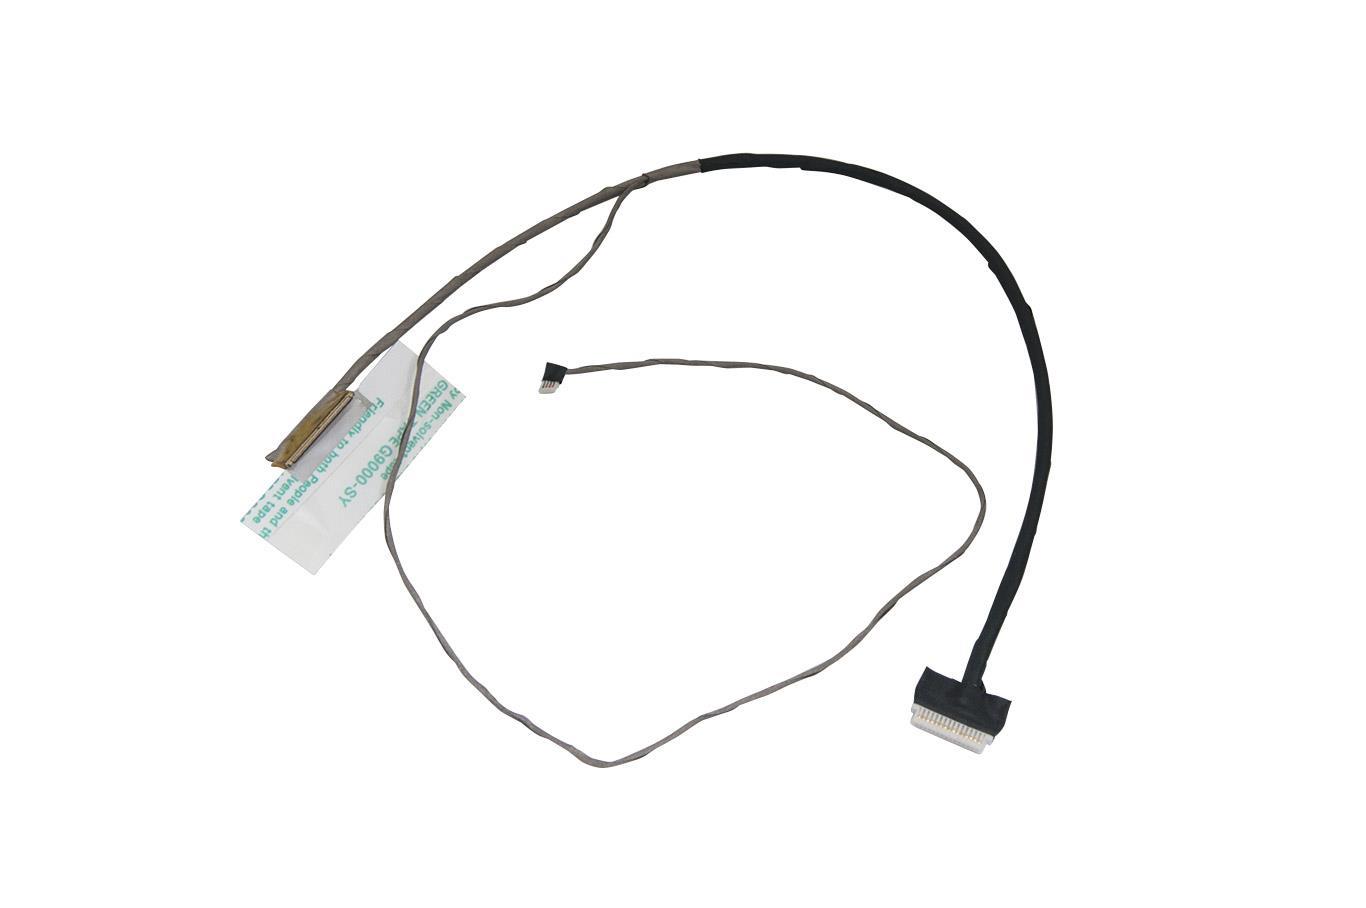 LENOVO G400s G405s G410s DC02001QH10 LCD LED Screen Cable